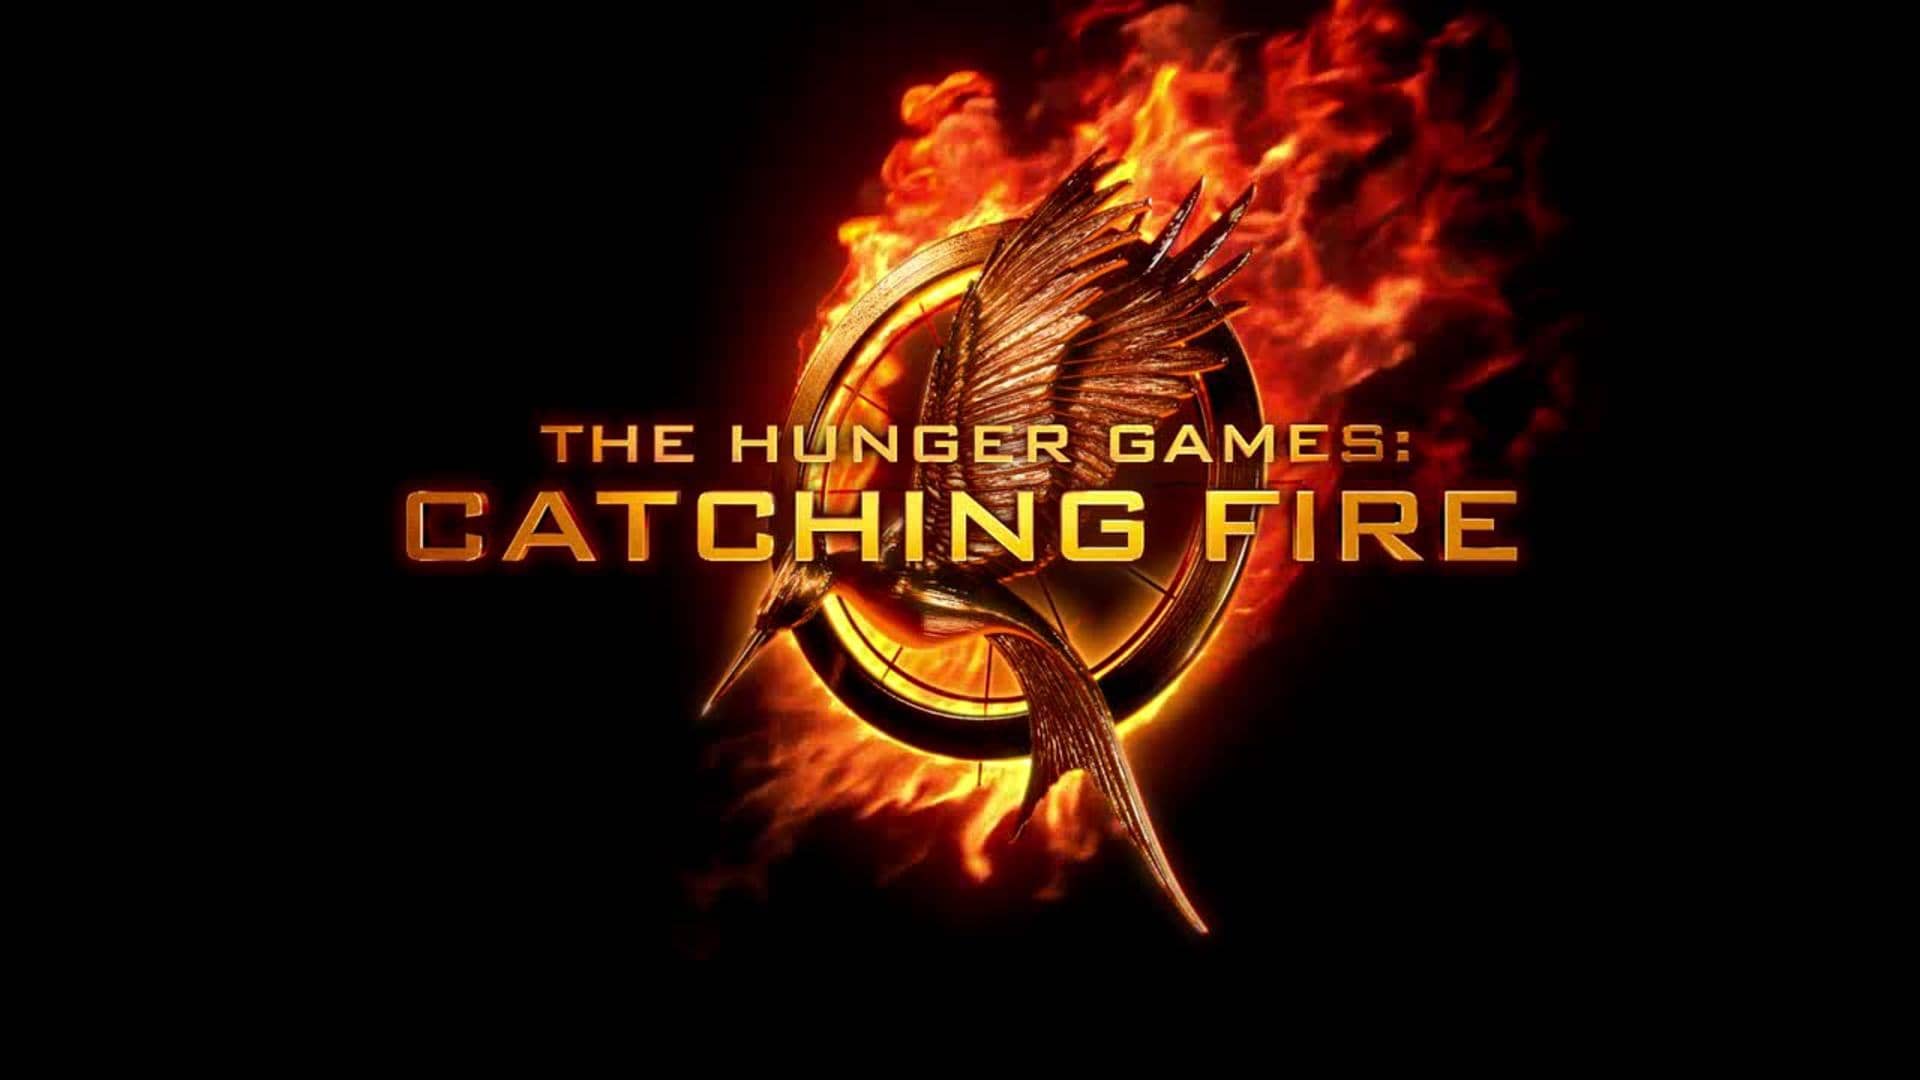 The Hunger Games Catching Fire 4K 2013 big poster